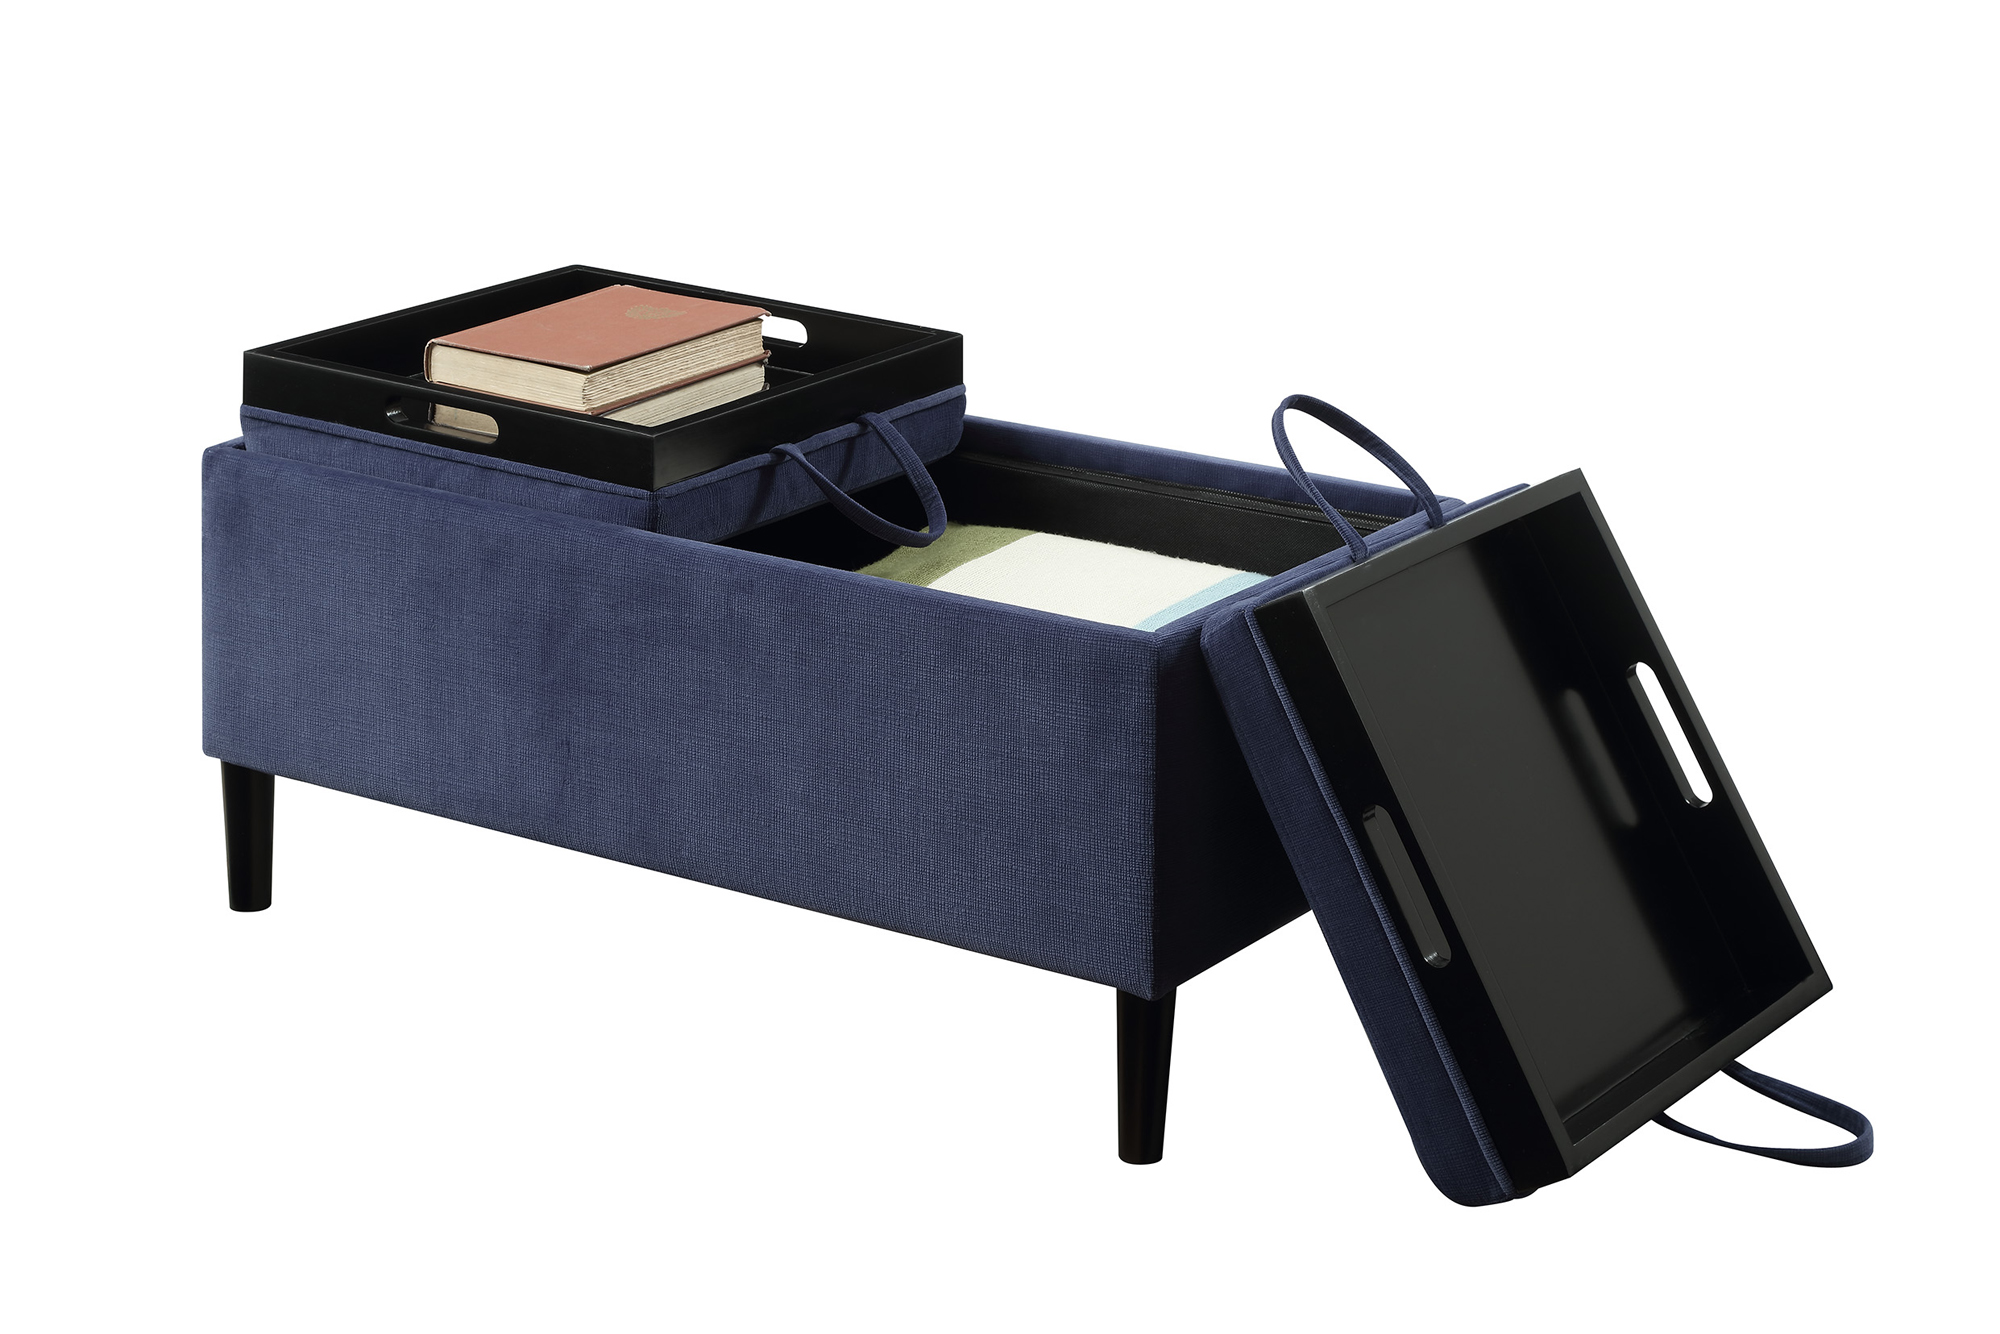 Convenience Concepts Designs4Comfort Magnolia Storage Ottoman with Reversible Trays, Dark Blue Corduroy - image 3 of 4